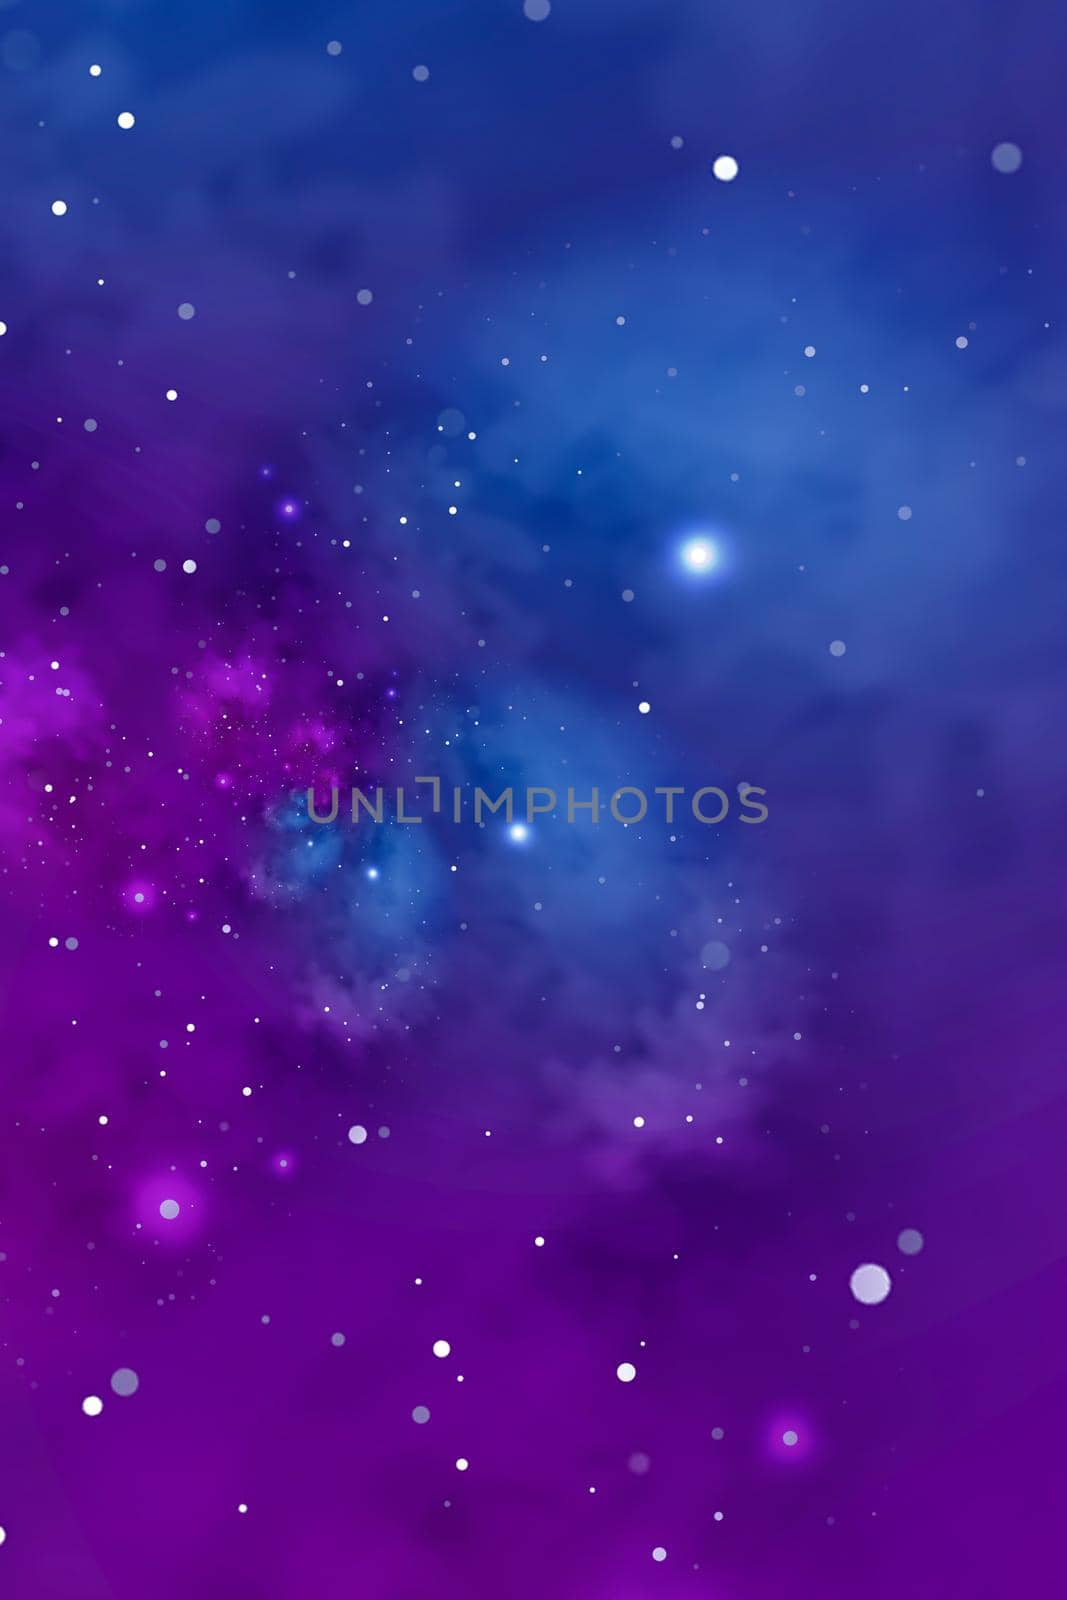 Starry blue sky. Abstract background with nebula, cosmo, galaxy.